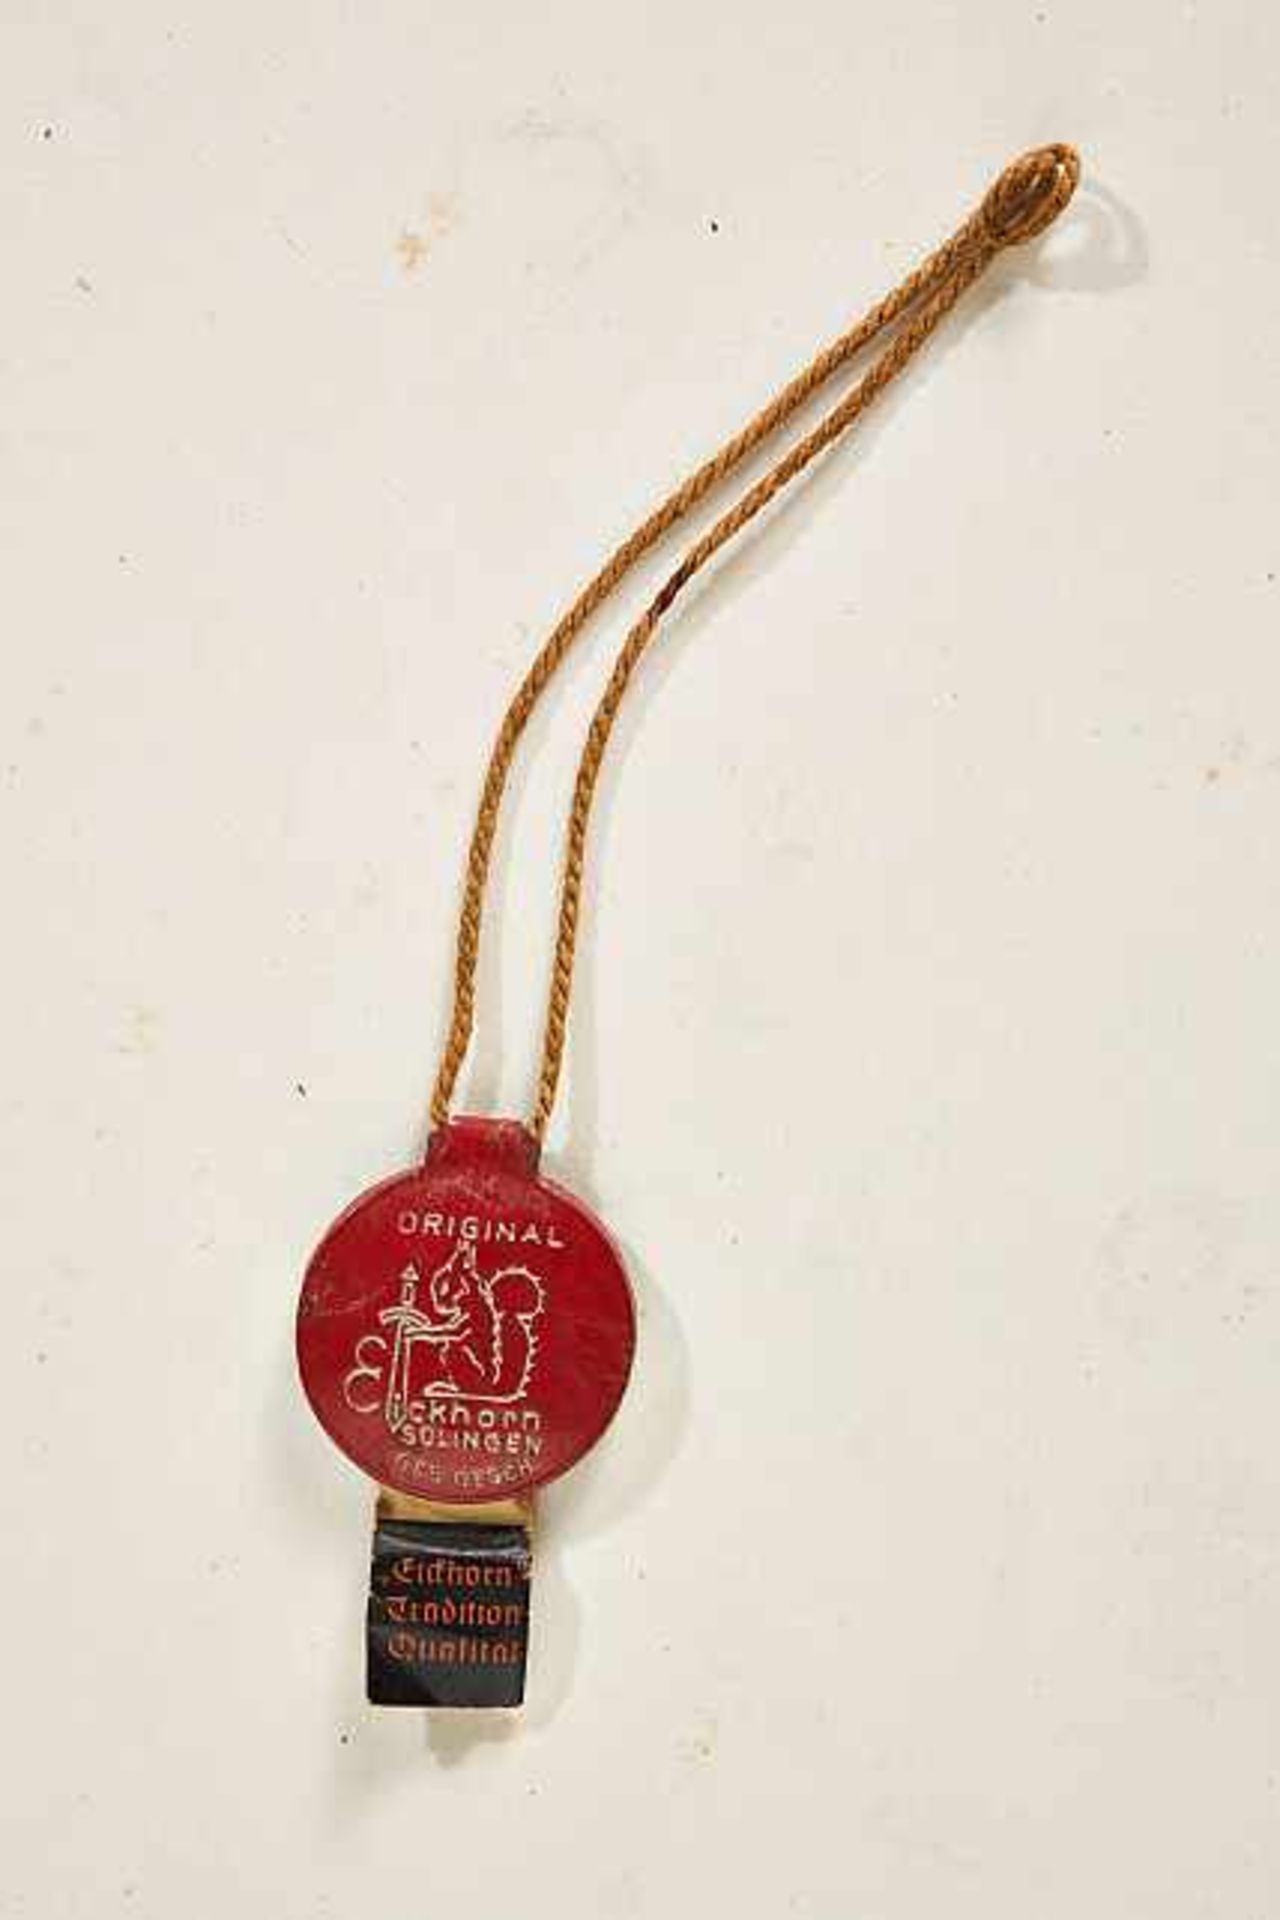 Deutsches Reich 1933 - 1945 - Heer - Edged Weapons : Eickhorn Quality Control Tag.Rare quality